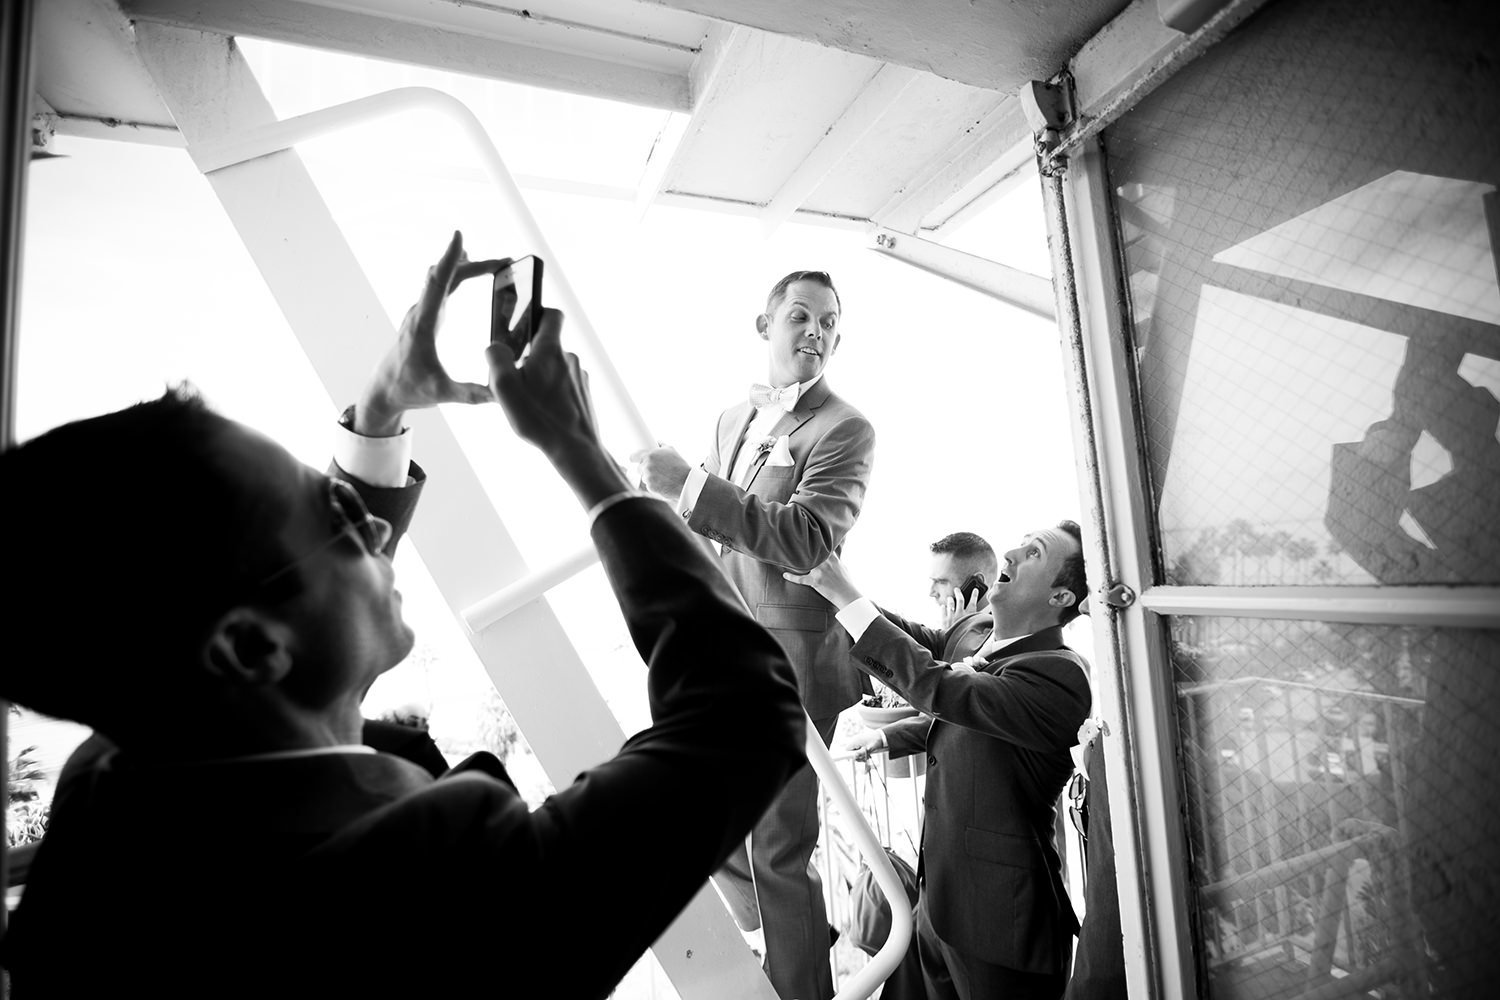 Photojournalistic moment captured of the groom and his groomsmen on the fire escape